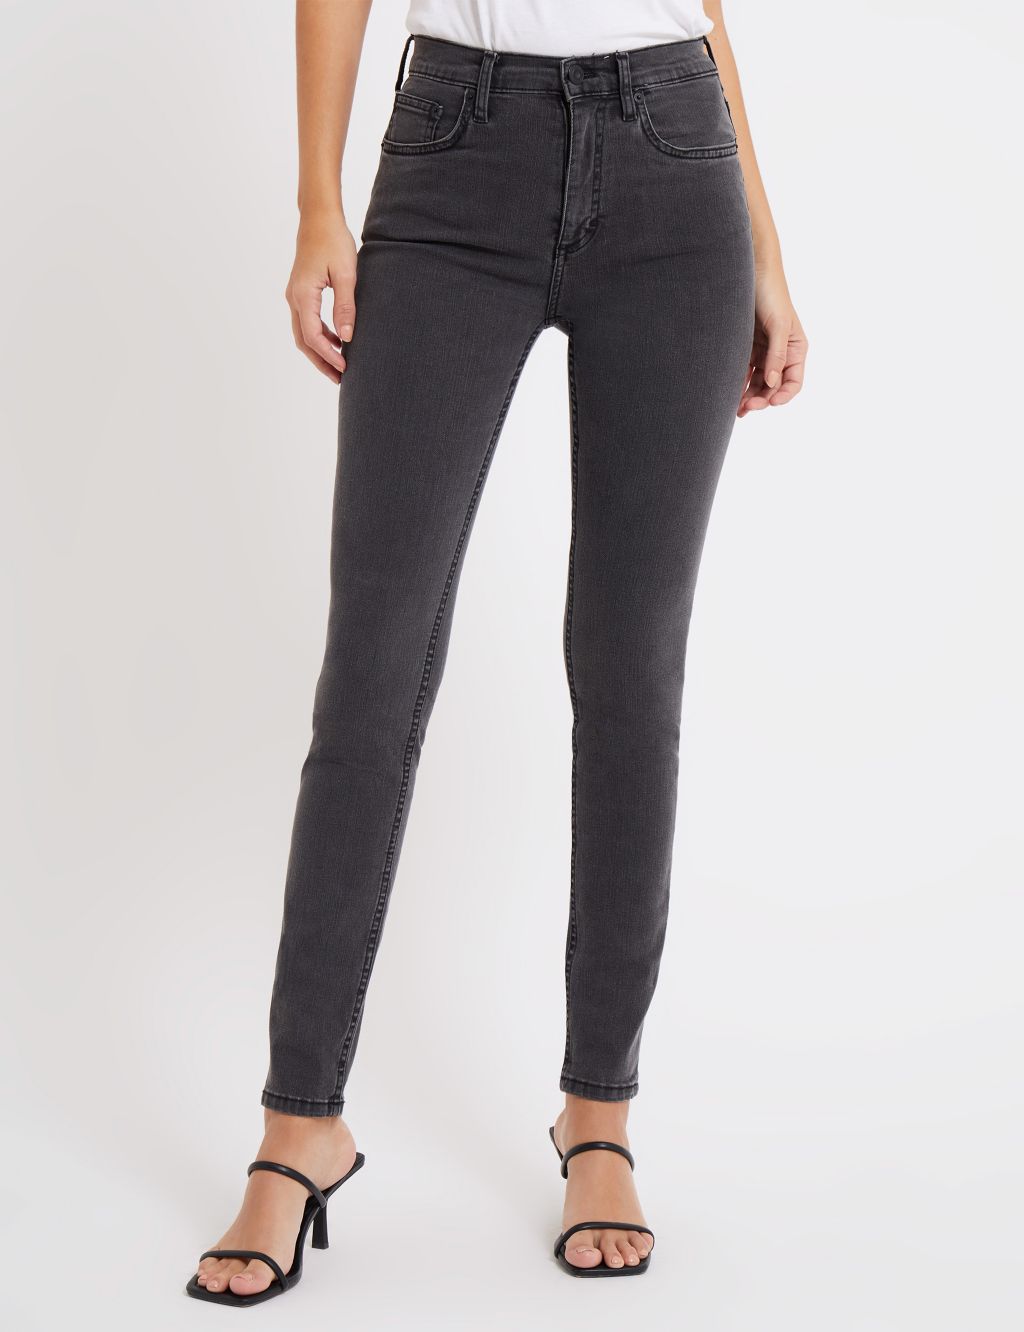 High Waisted Skinny Ankle Grazer Jeans